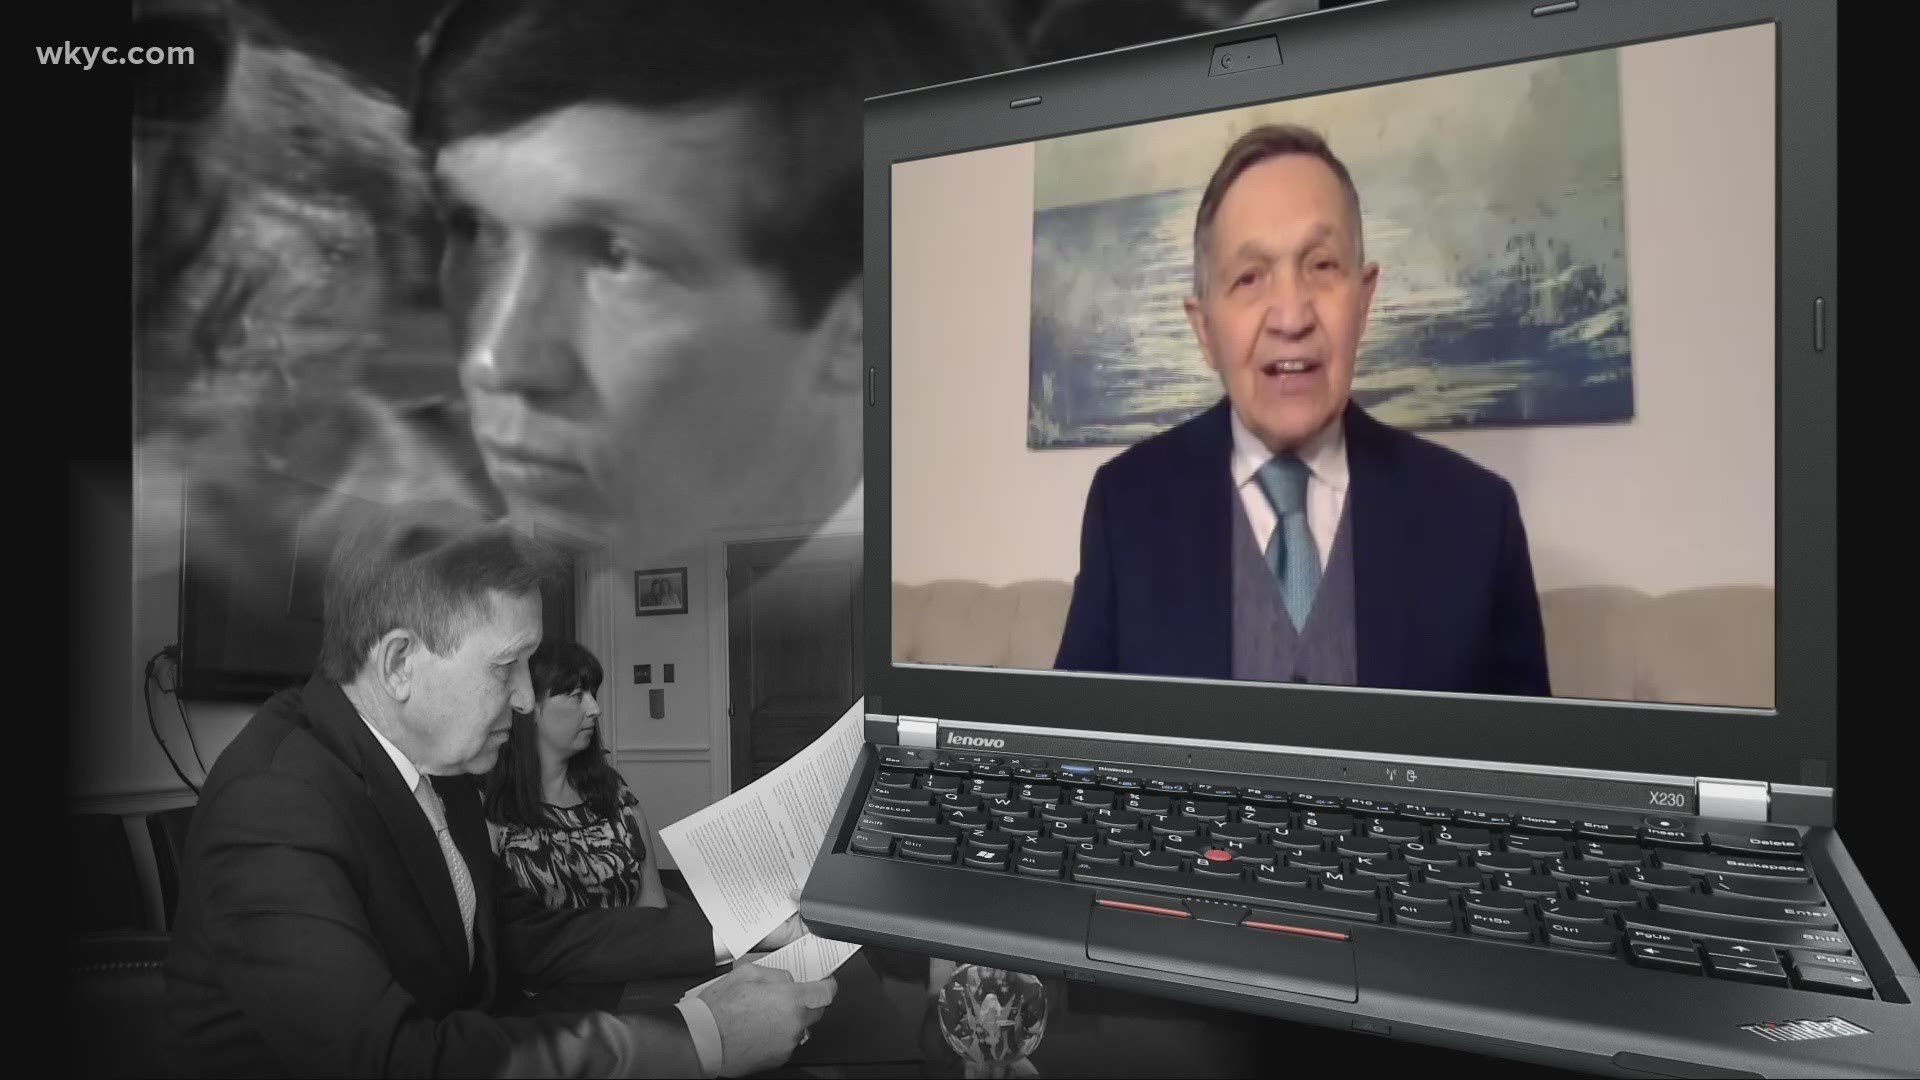 In an exclusive interview with 3News, Kucinich talks about his book, the current state of the troubled utility and whether his future includes another bid for mayor.